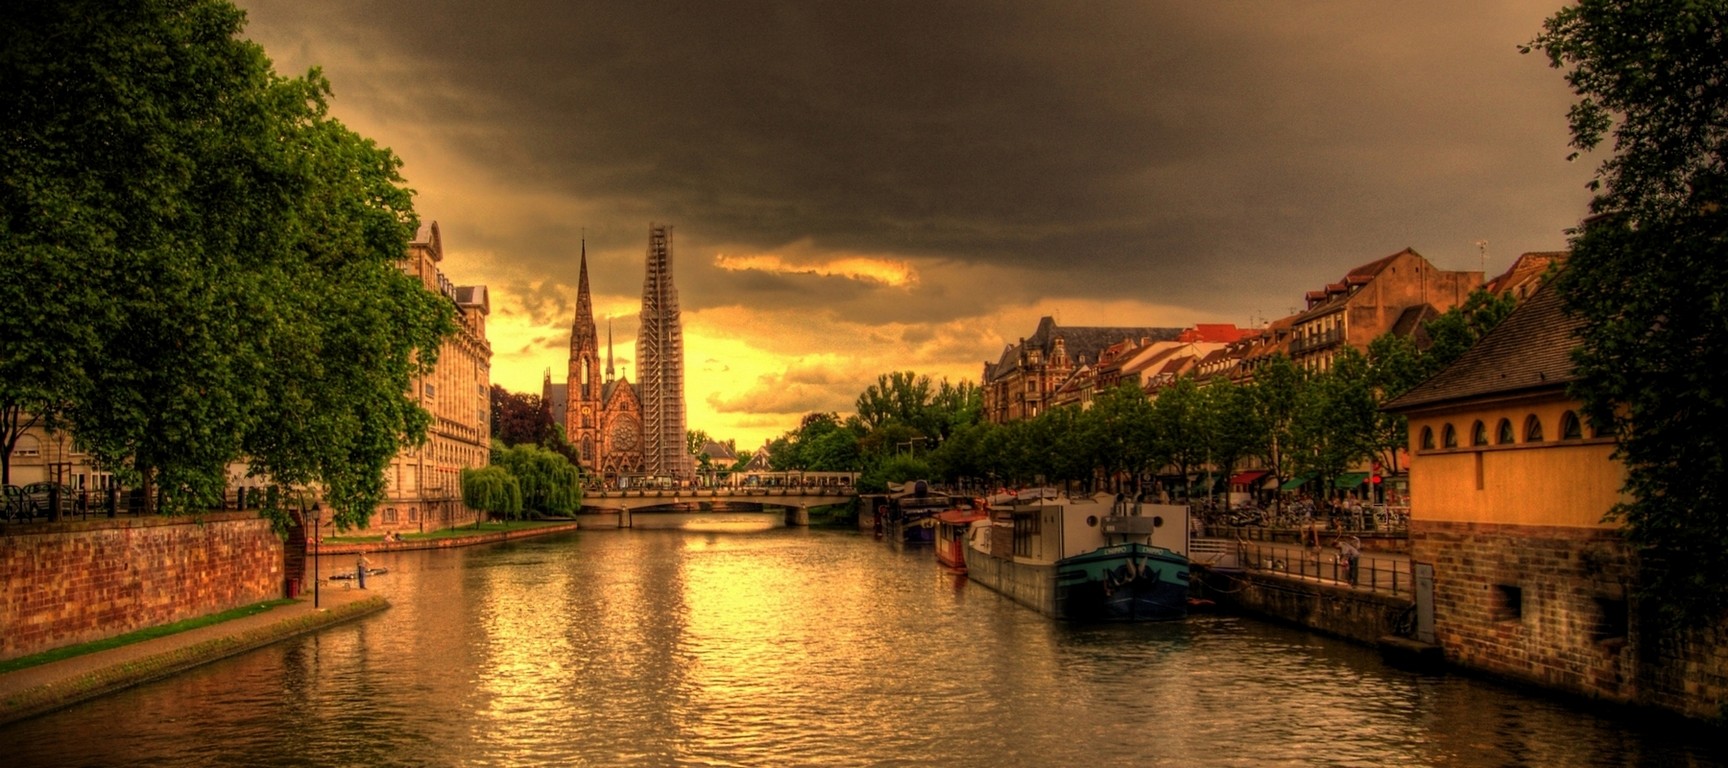 General 1728x768 river HDR city trees clouds architecture France building church bridge urban sunlight Strasbourg boat